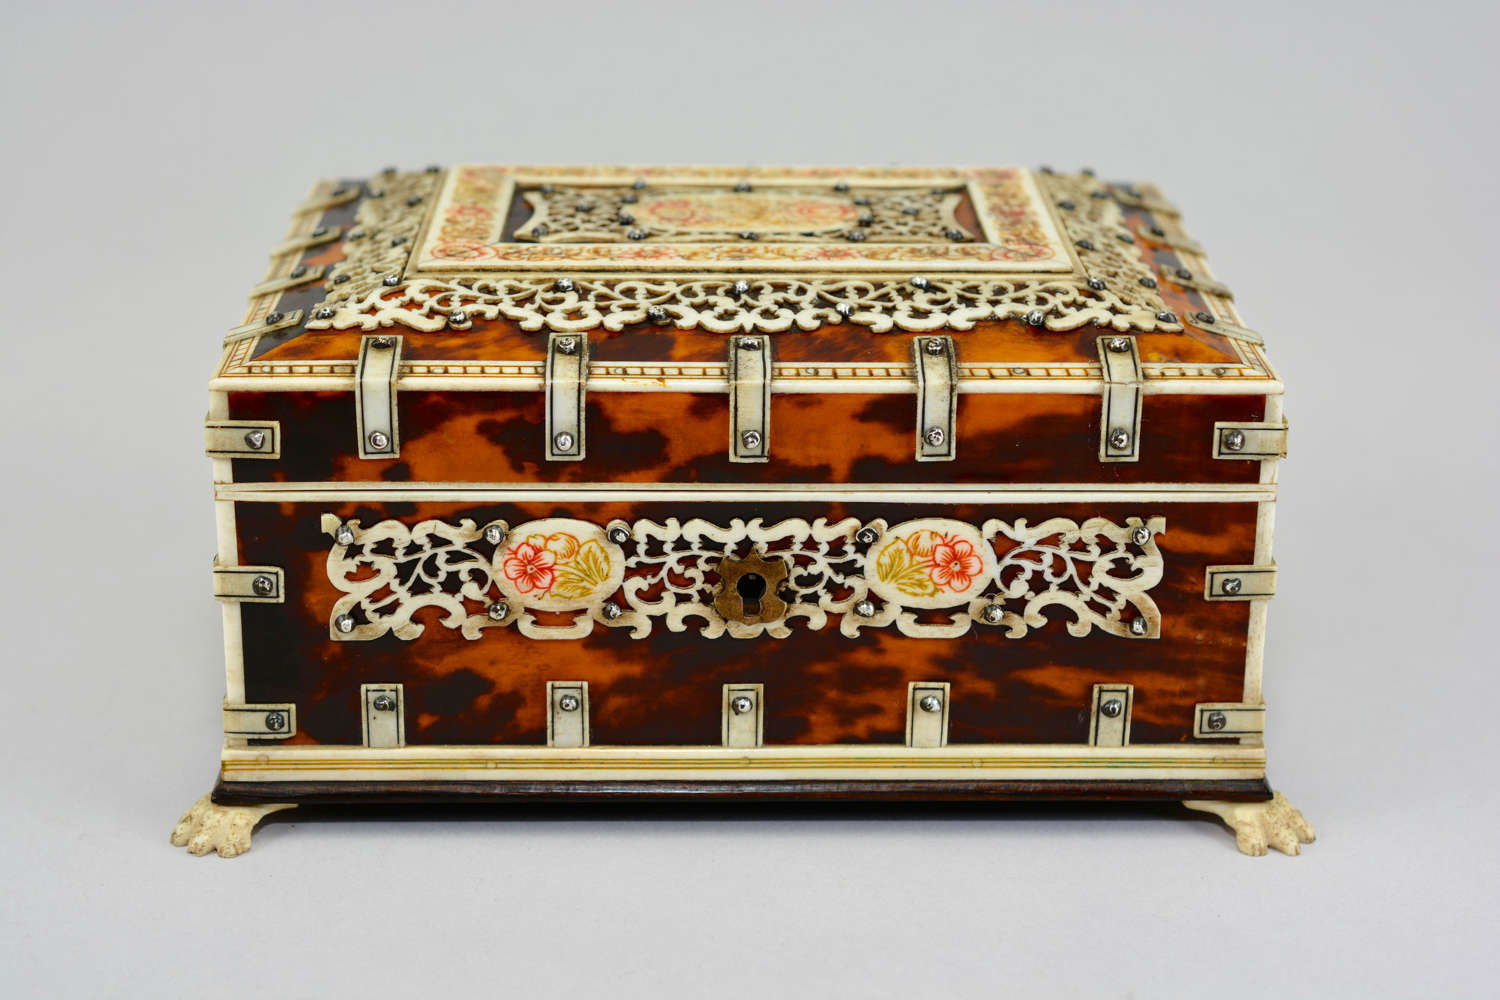 Anglo-Indian colonial period jewellery box dating from circa.1900